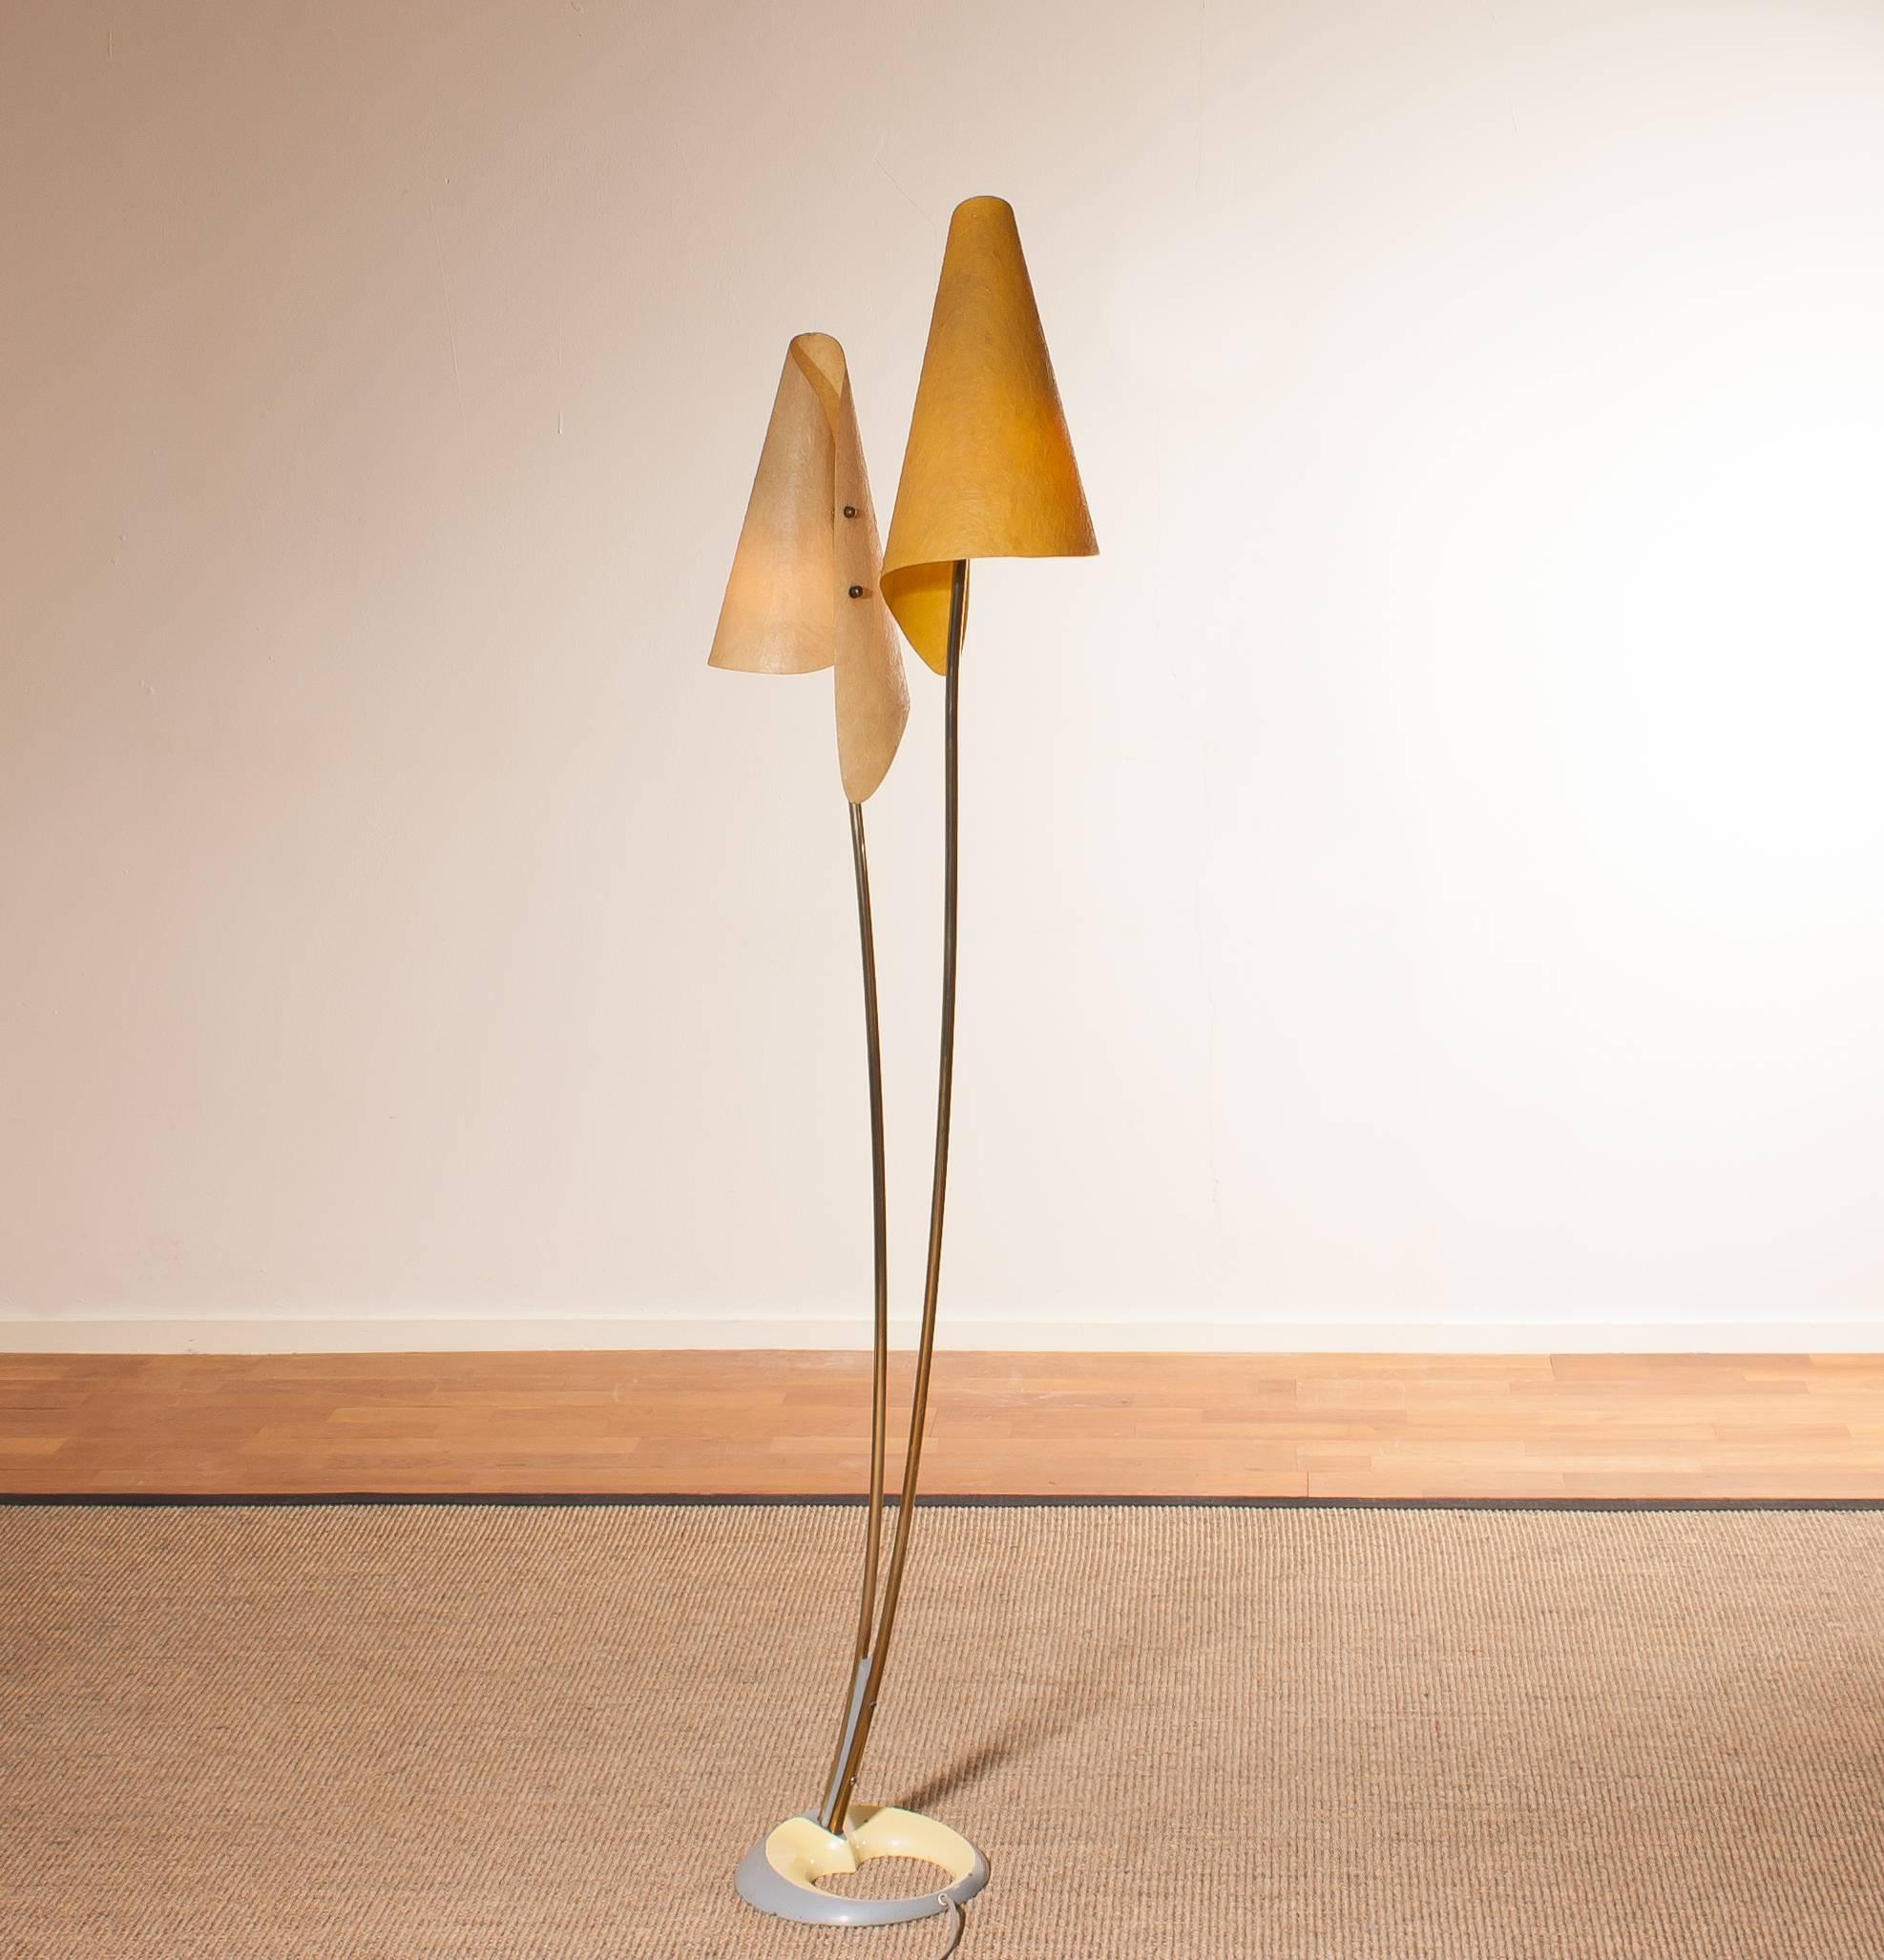 Very rare and beautiful floor lamp with two fiberglass shades and a wonderful design stand.
This very nice design is made in Germany.
It is in a very good and working condition.
Period 1960s
Dimensions: H 164 cm, W 46 cm, D 25 cm.